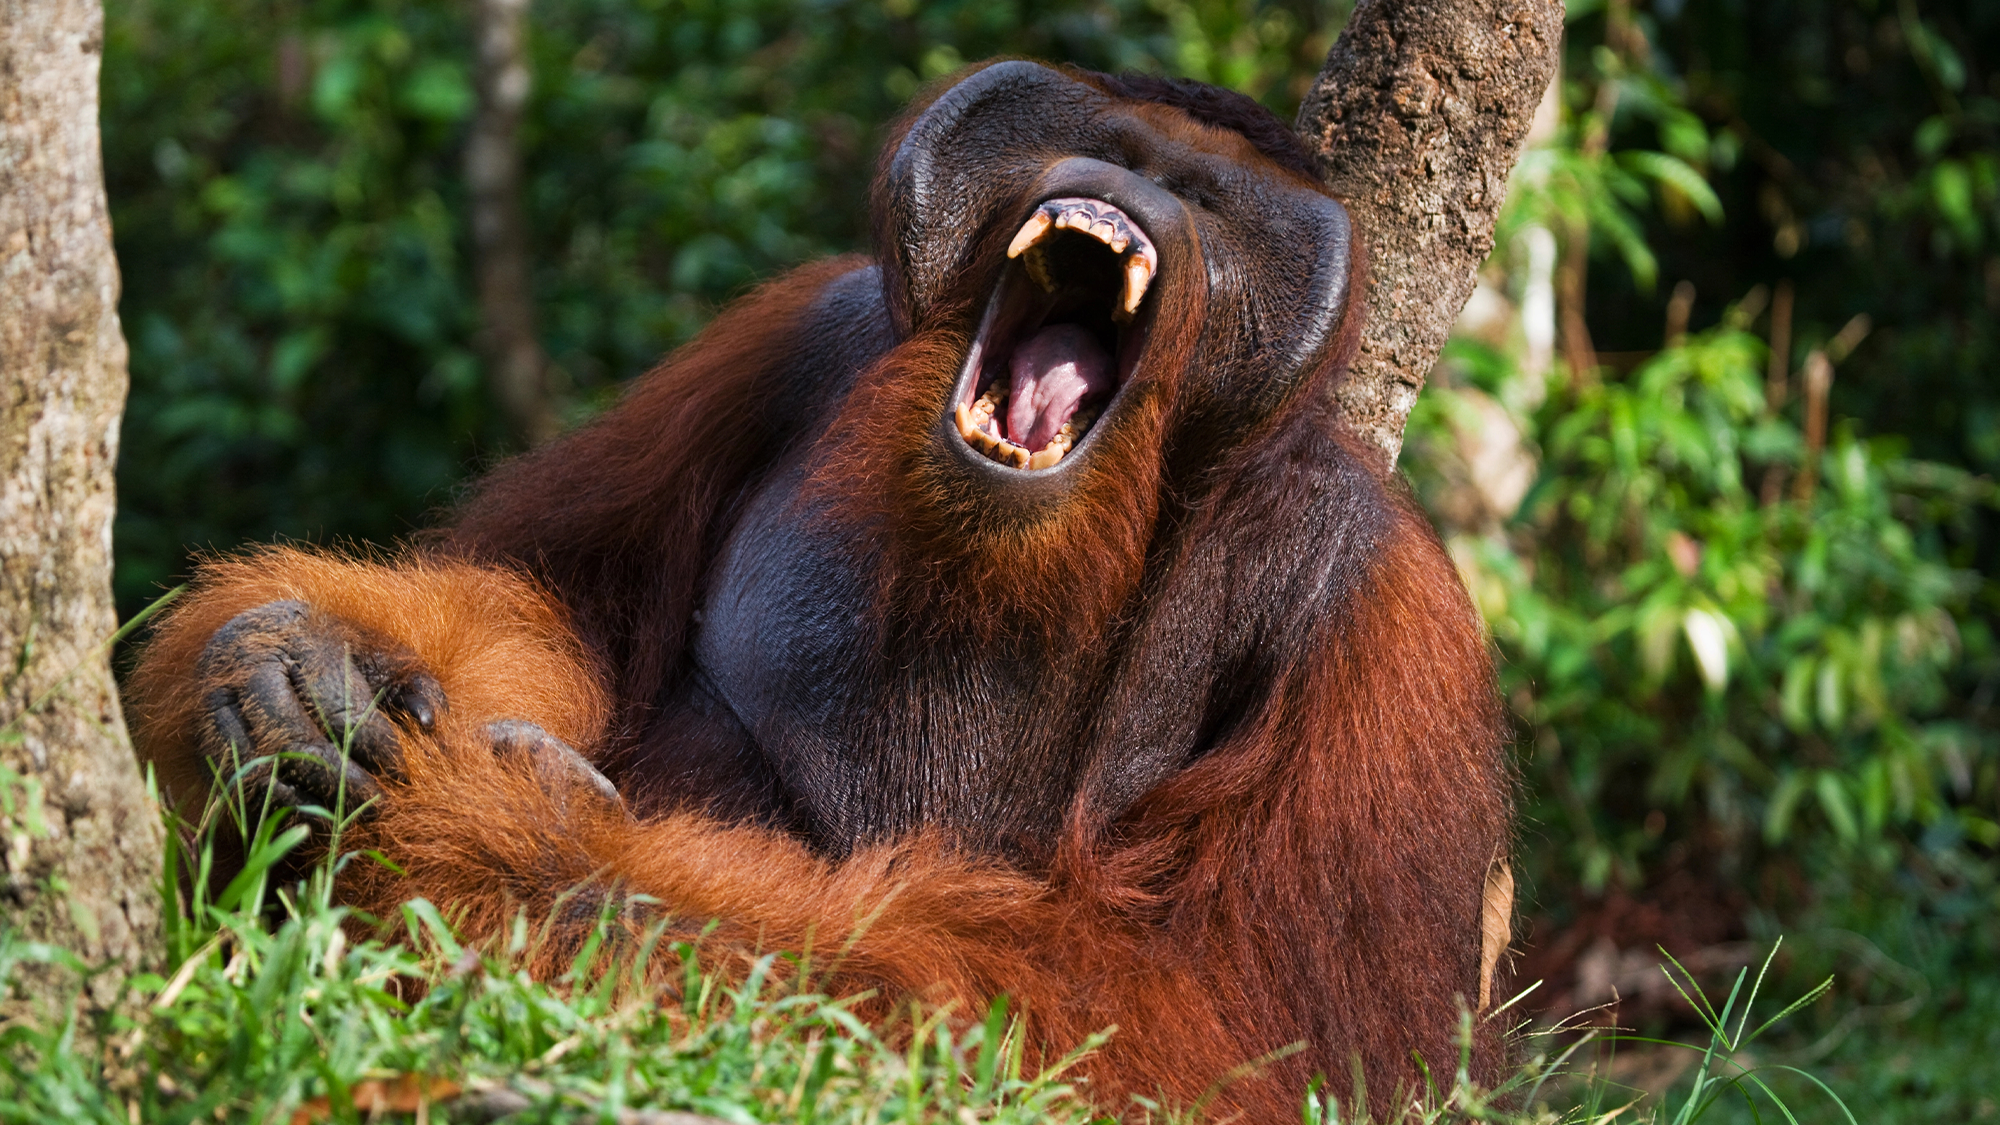 The orangutan's distinctive cries have been decoded with the help of artificial intelligence